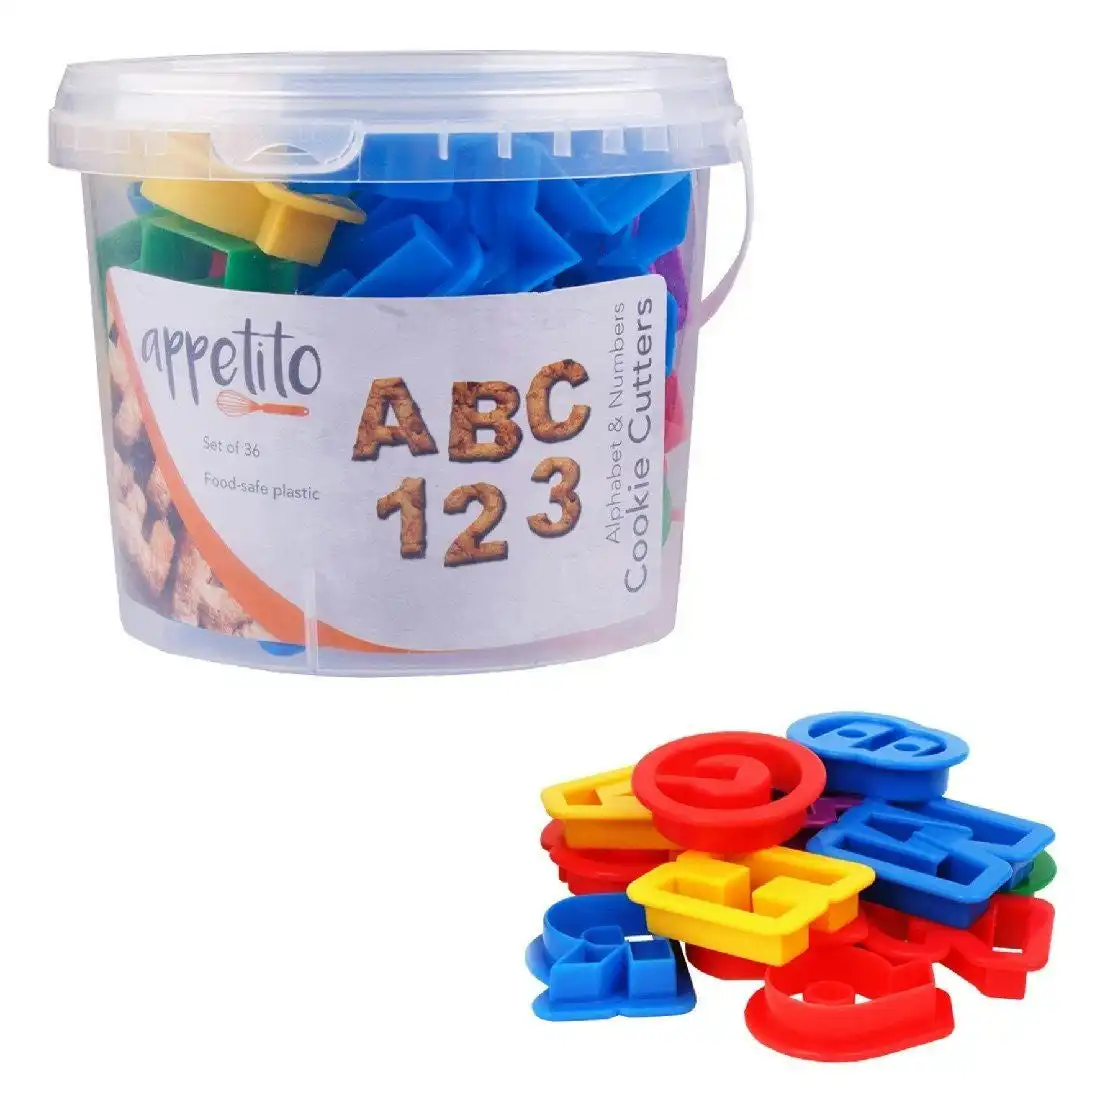 Appetito Alphabet & Number Cookie Cutter Set 36pc